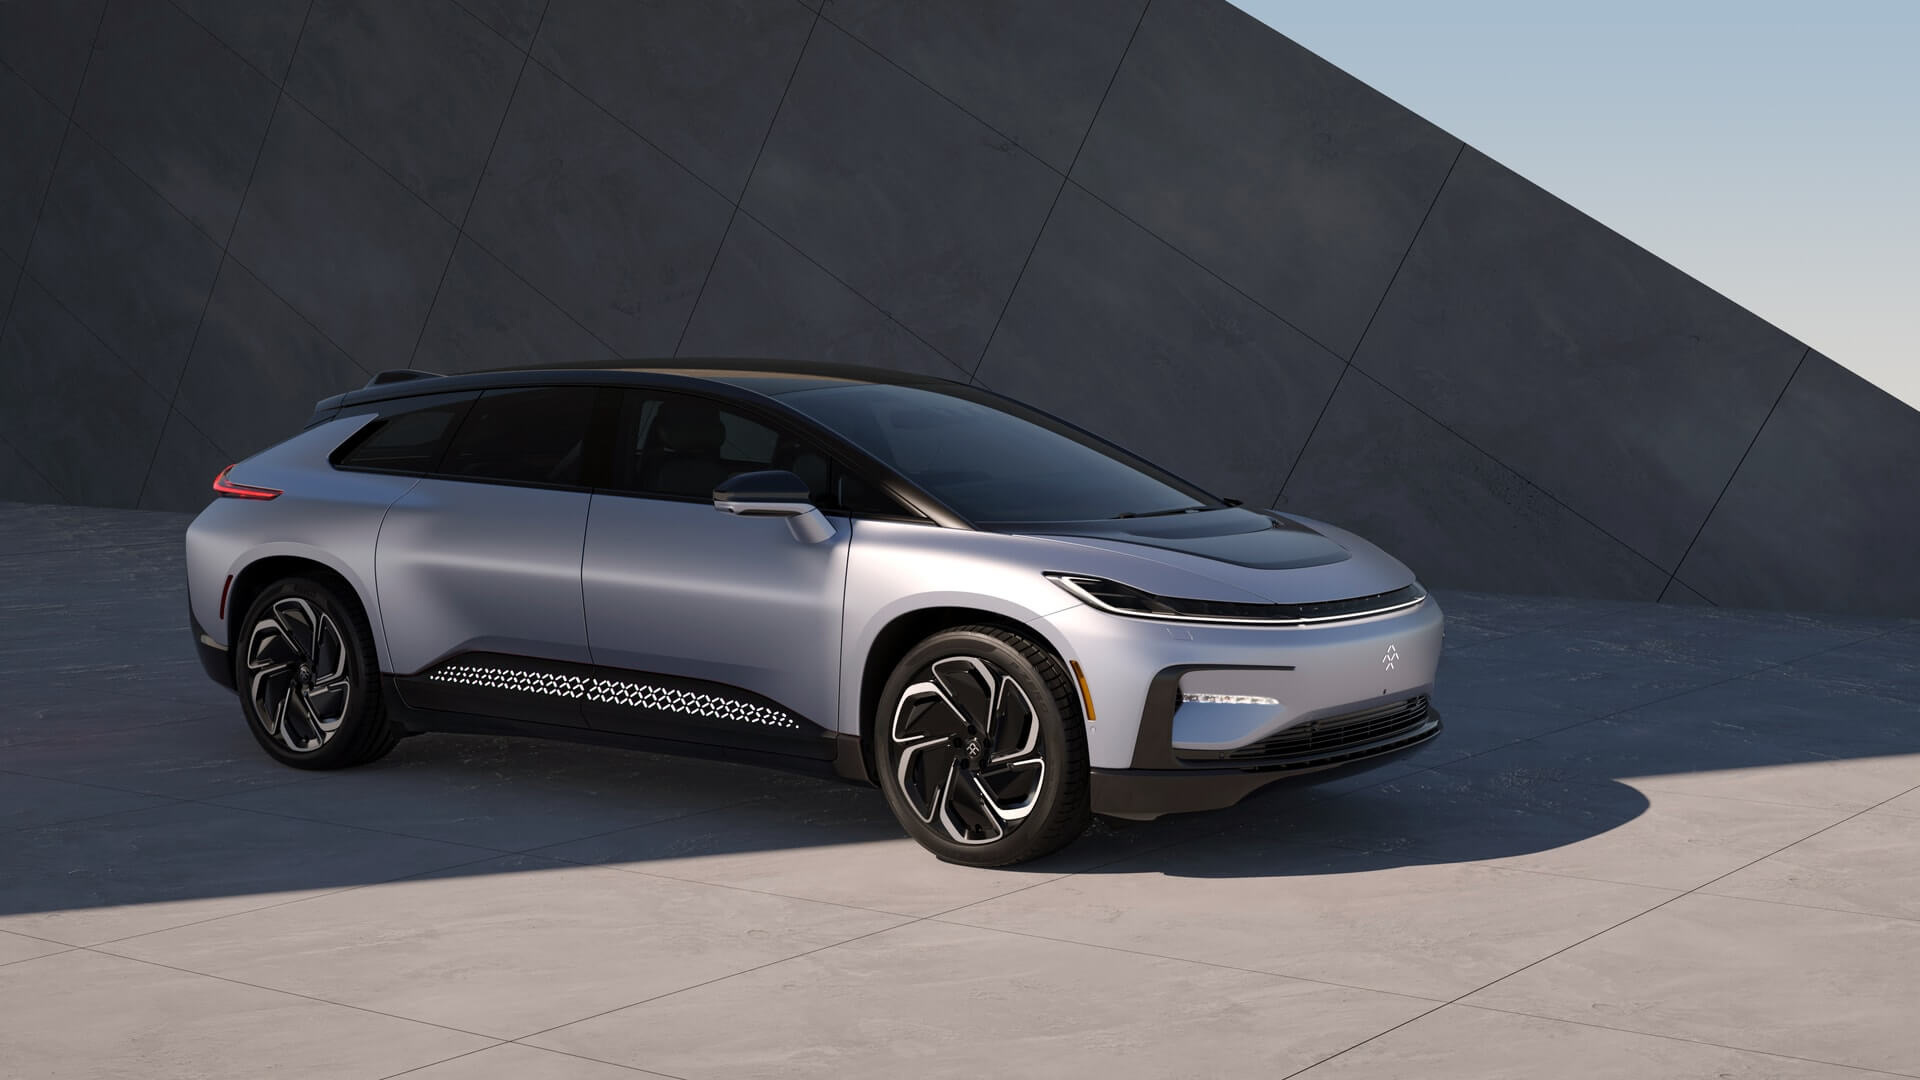 Faraday Future FF91 pre-orders, Luxury electric car, Reservation numbers, Auto industry, 1920x1080 Full HD Desktop